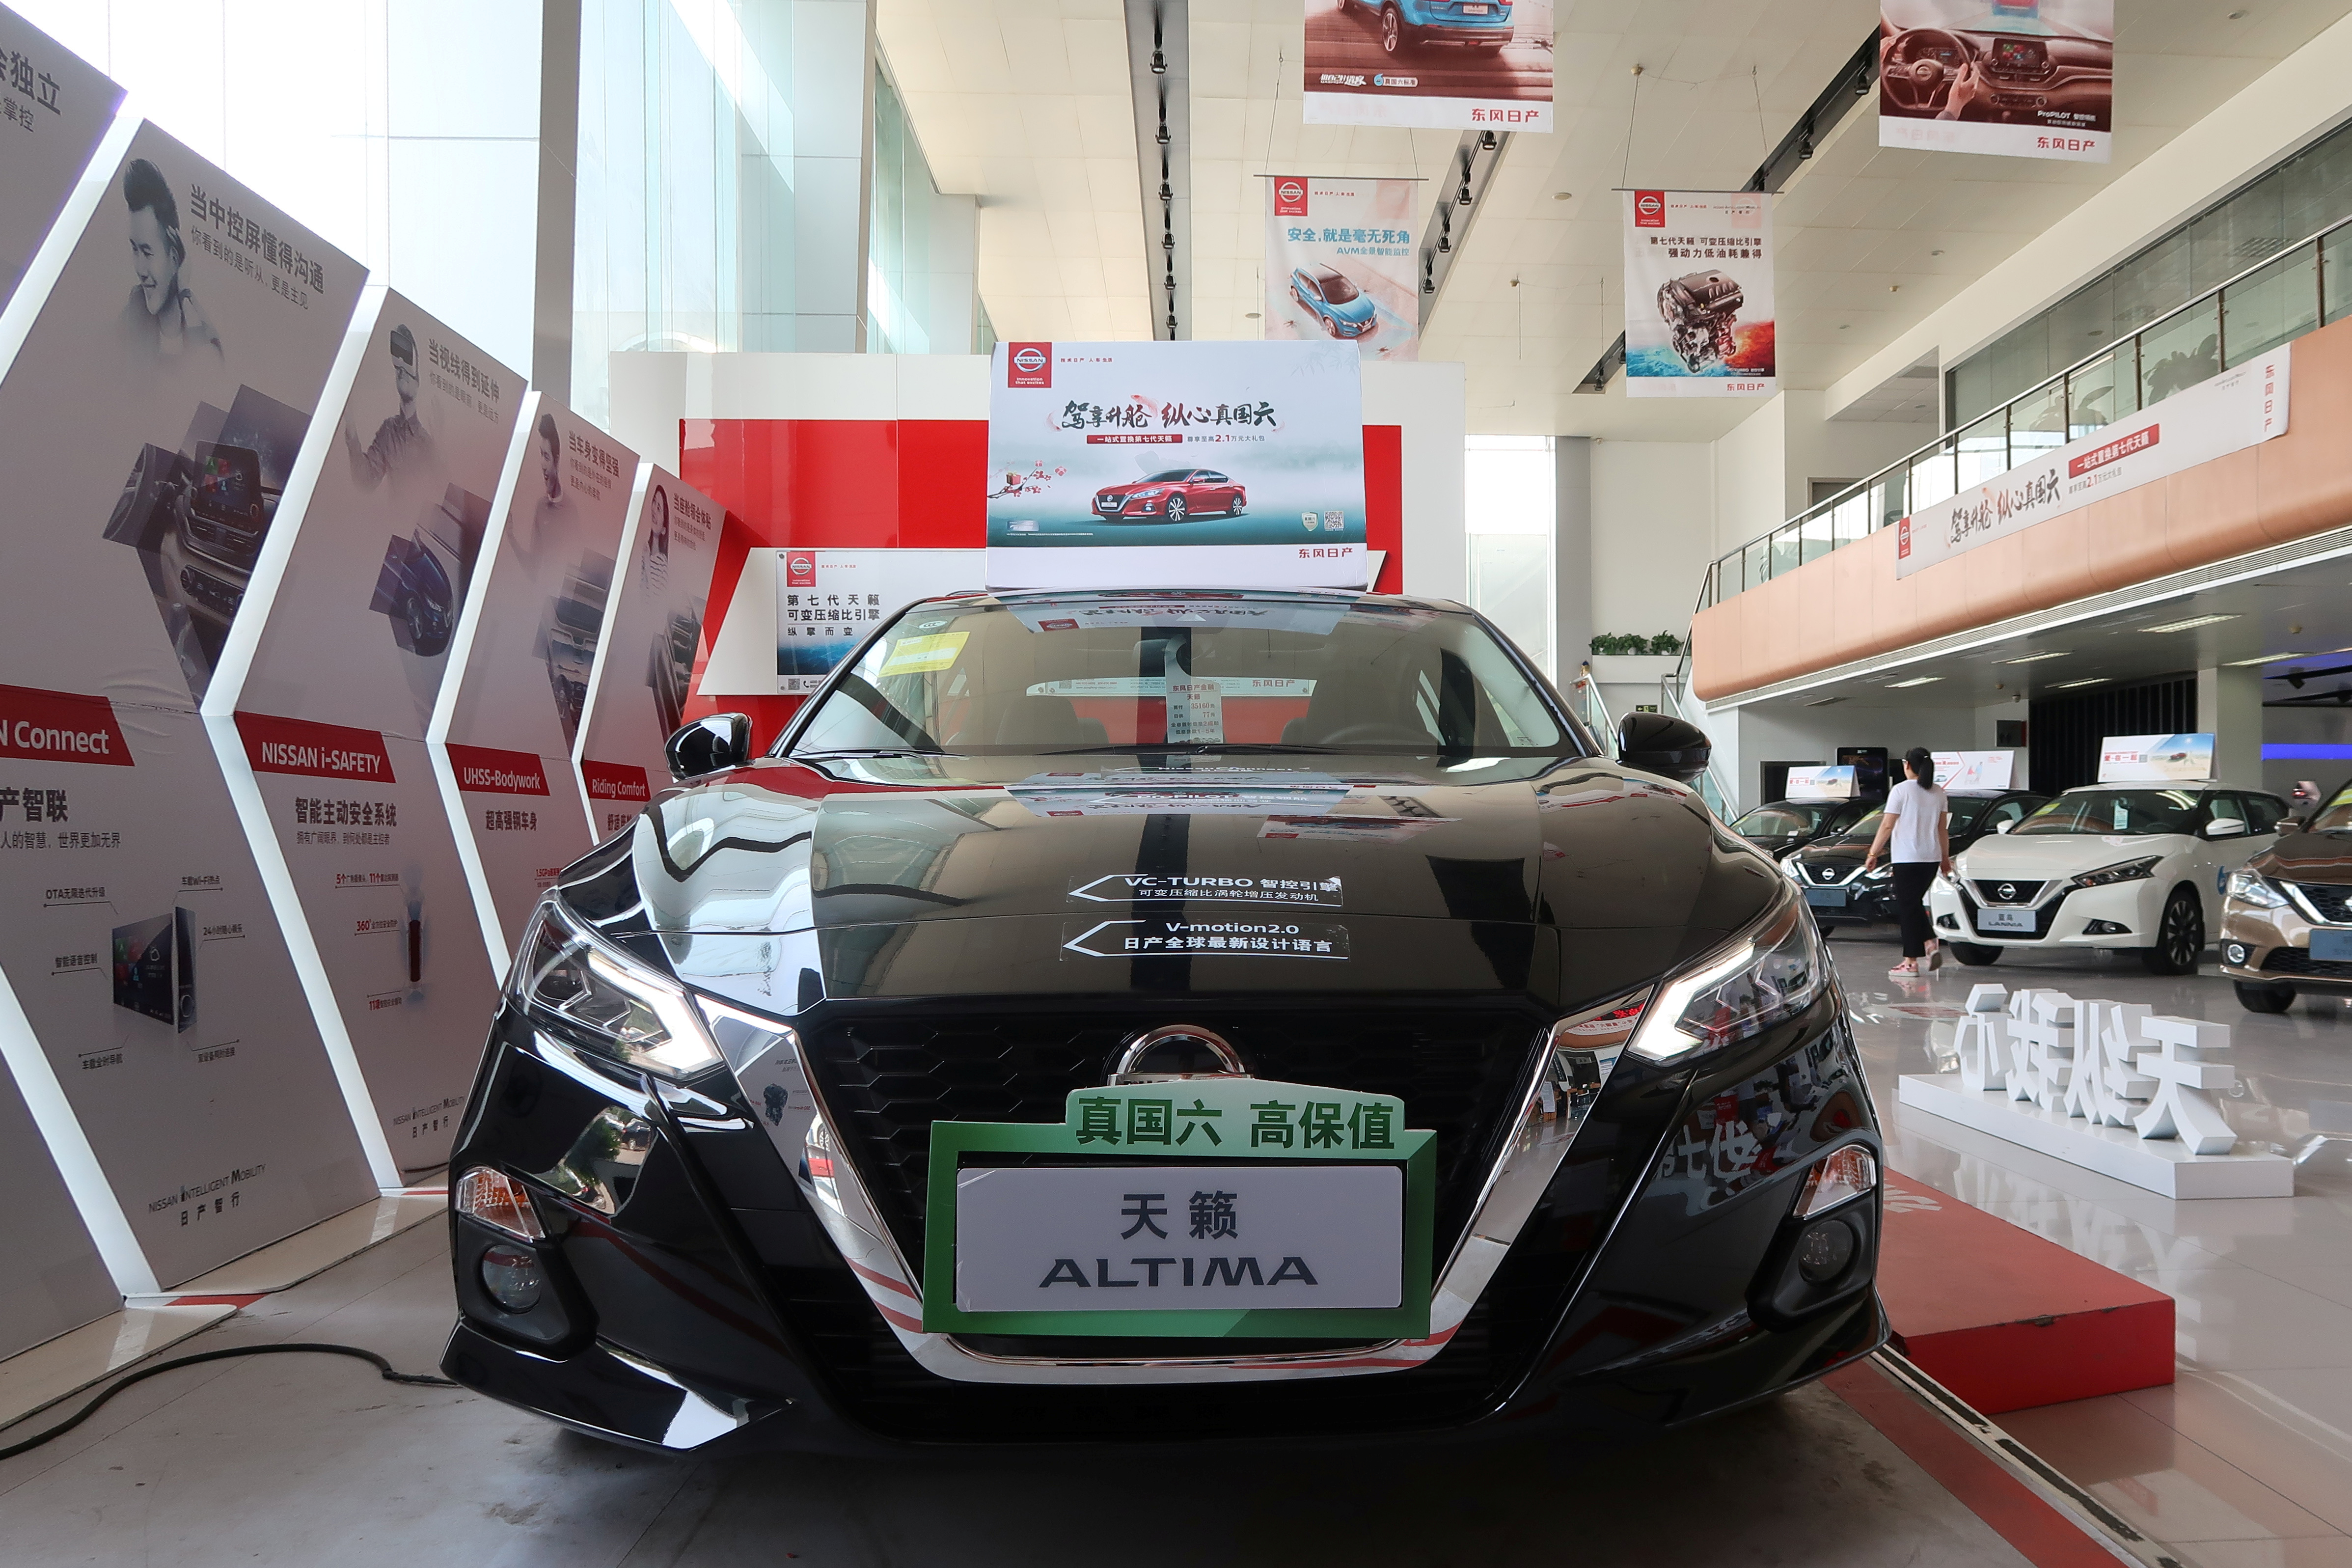 A Nissan Altima car with a China Stage VI emission standard is seen at a dealership in Beijing